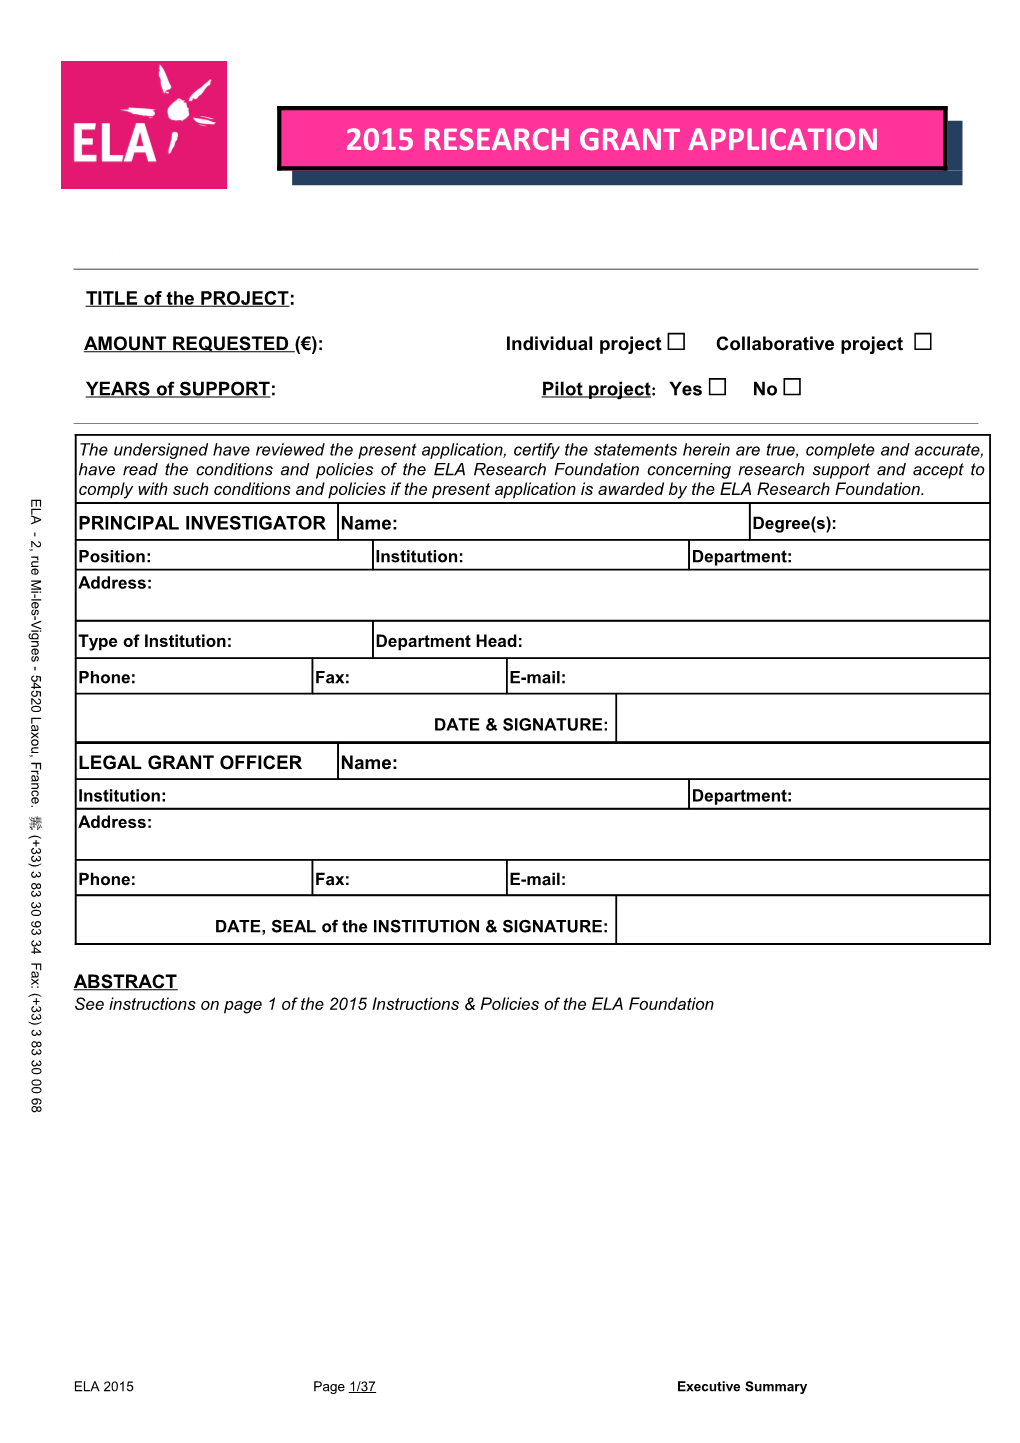 Research Grant Application Form 2007